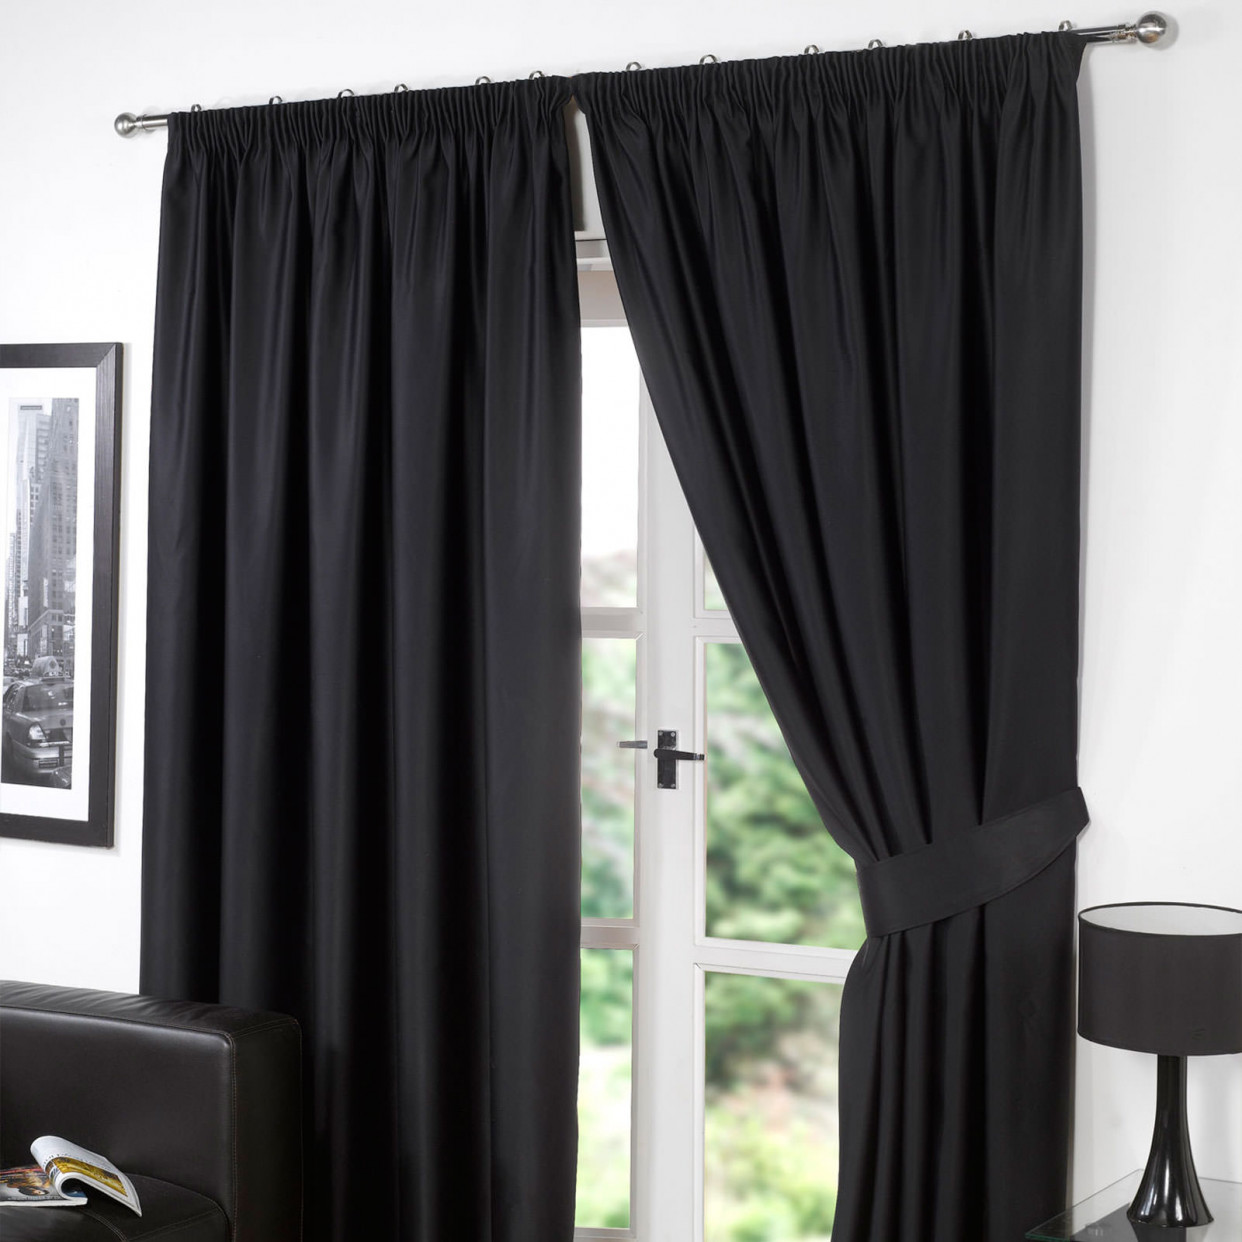 Pencil Pleat Thermal Blackout Fully Lined Curtains - Black 66x54>